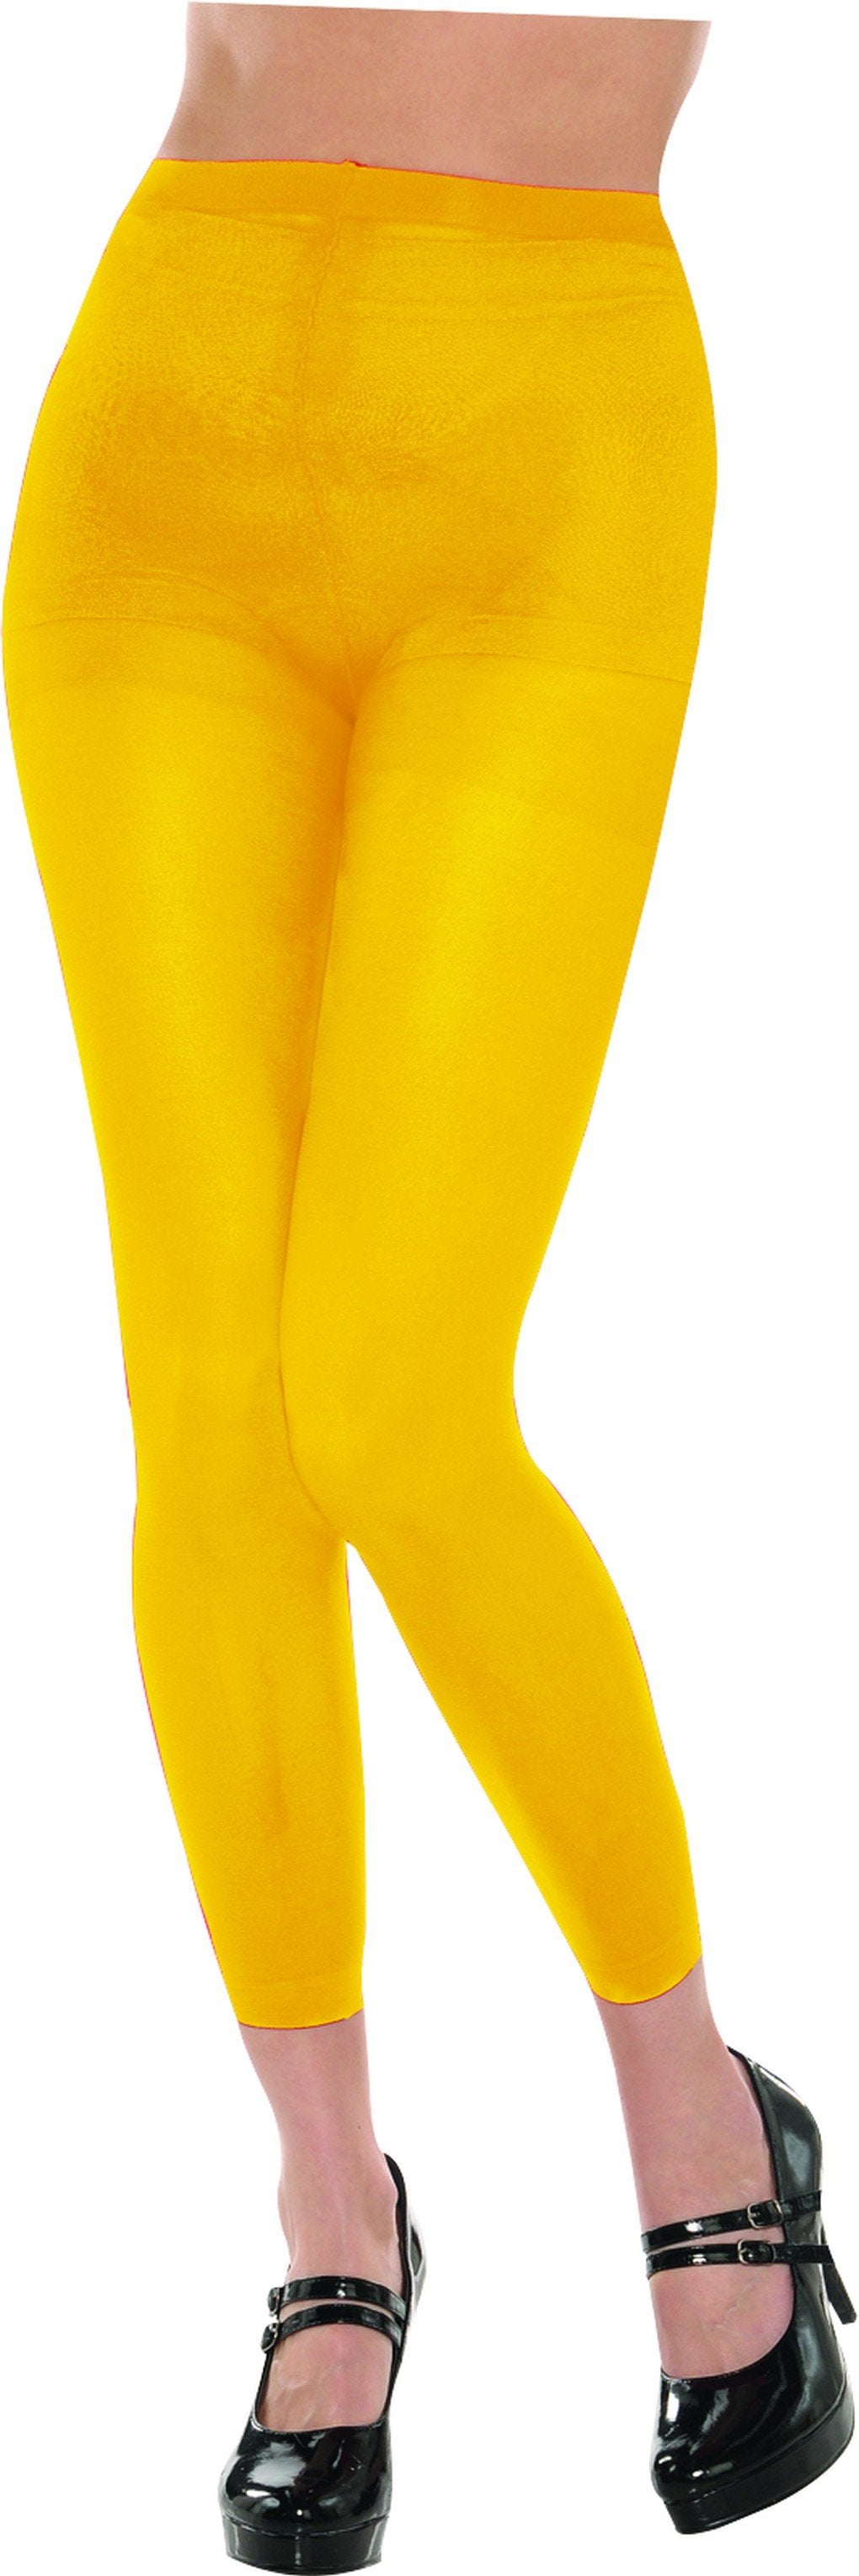 Yellow Footless Tights Adult